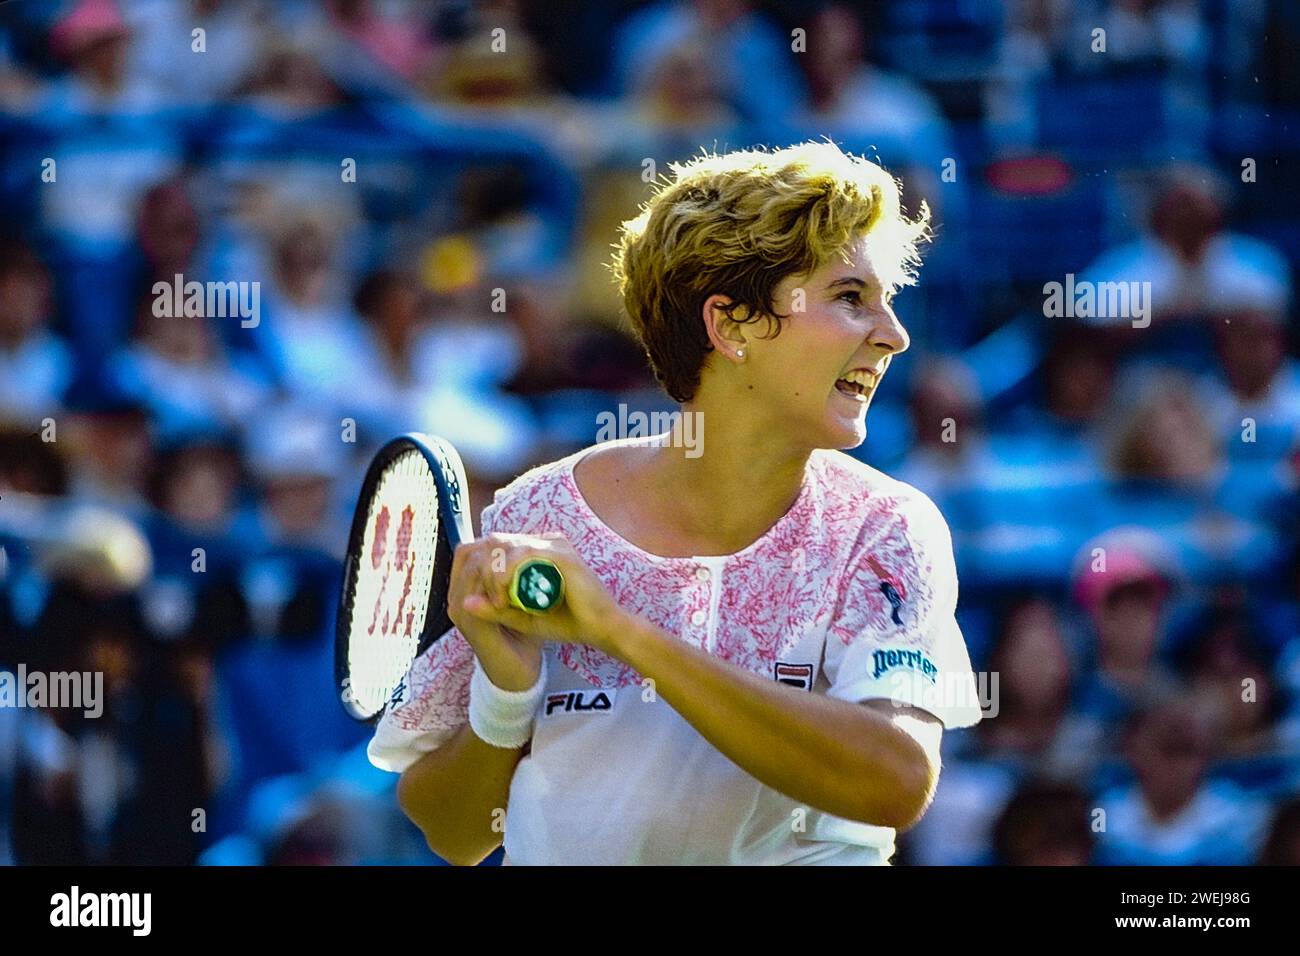 Monica Seles (USA) competing at the 1991 US Open Tennis. Stock Photo